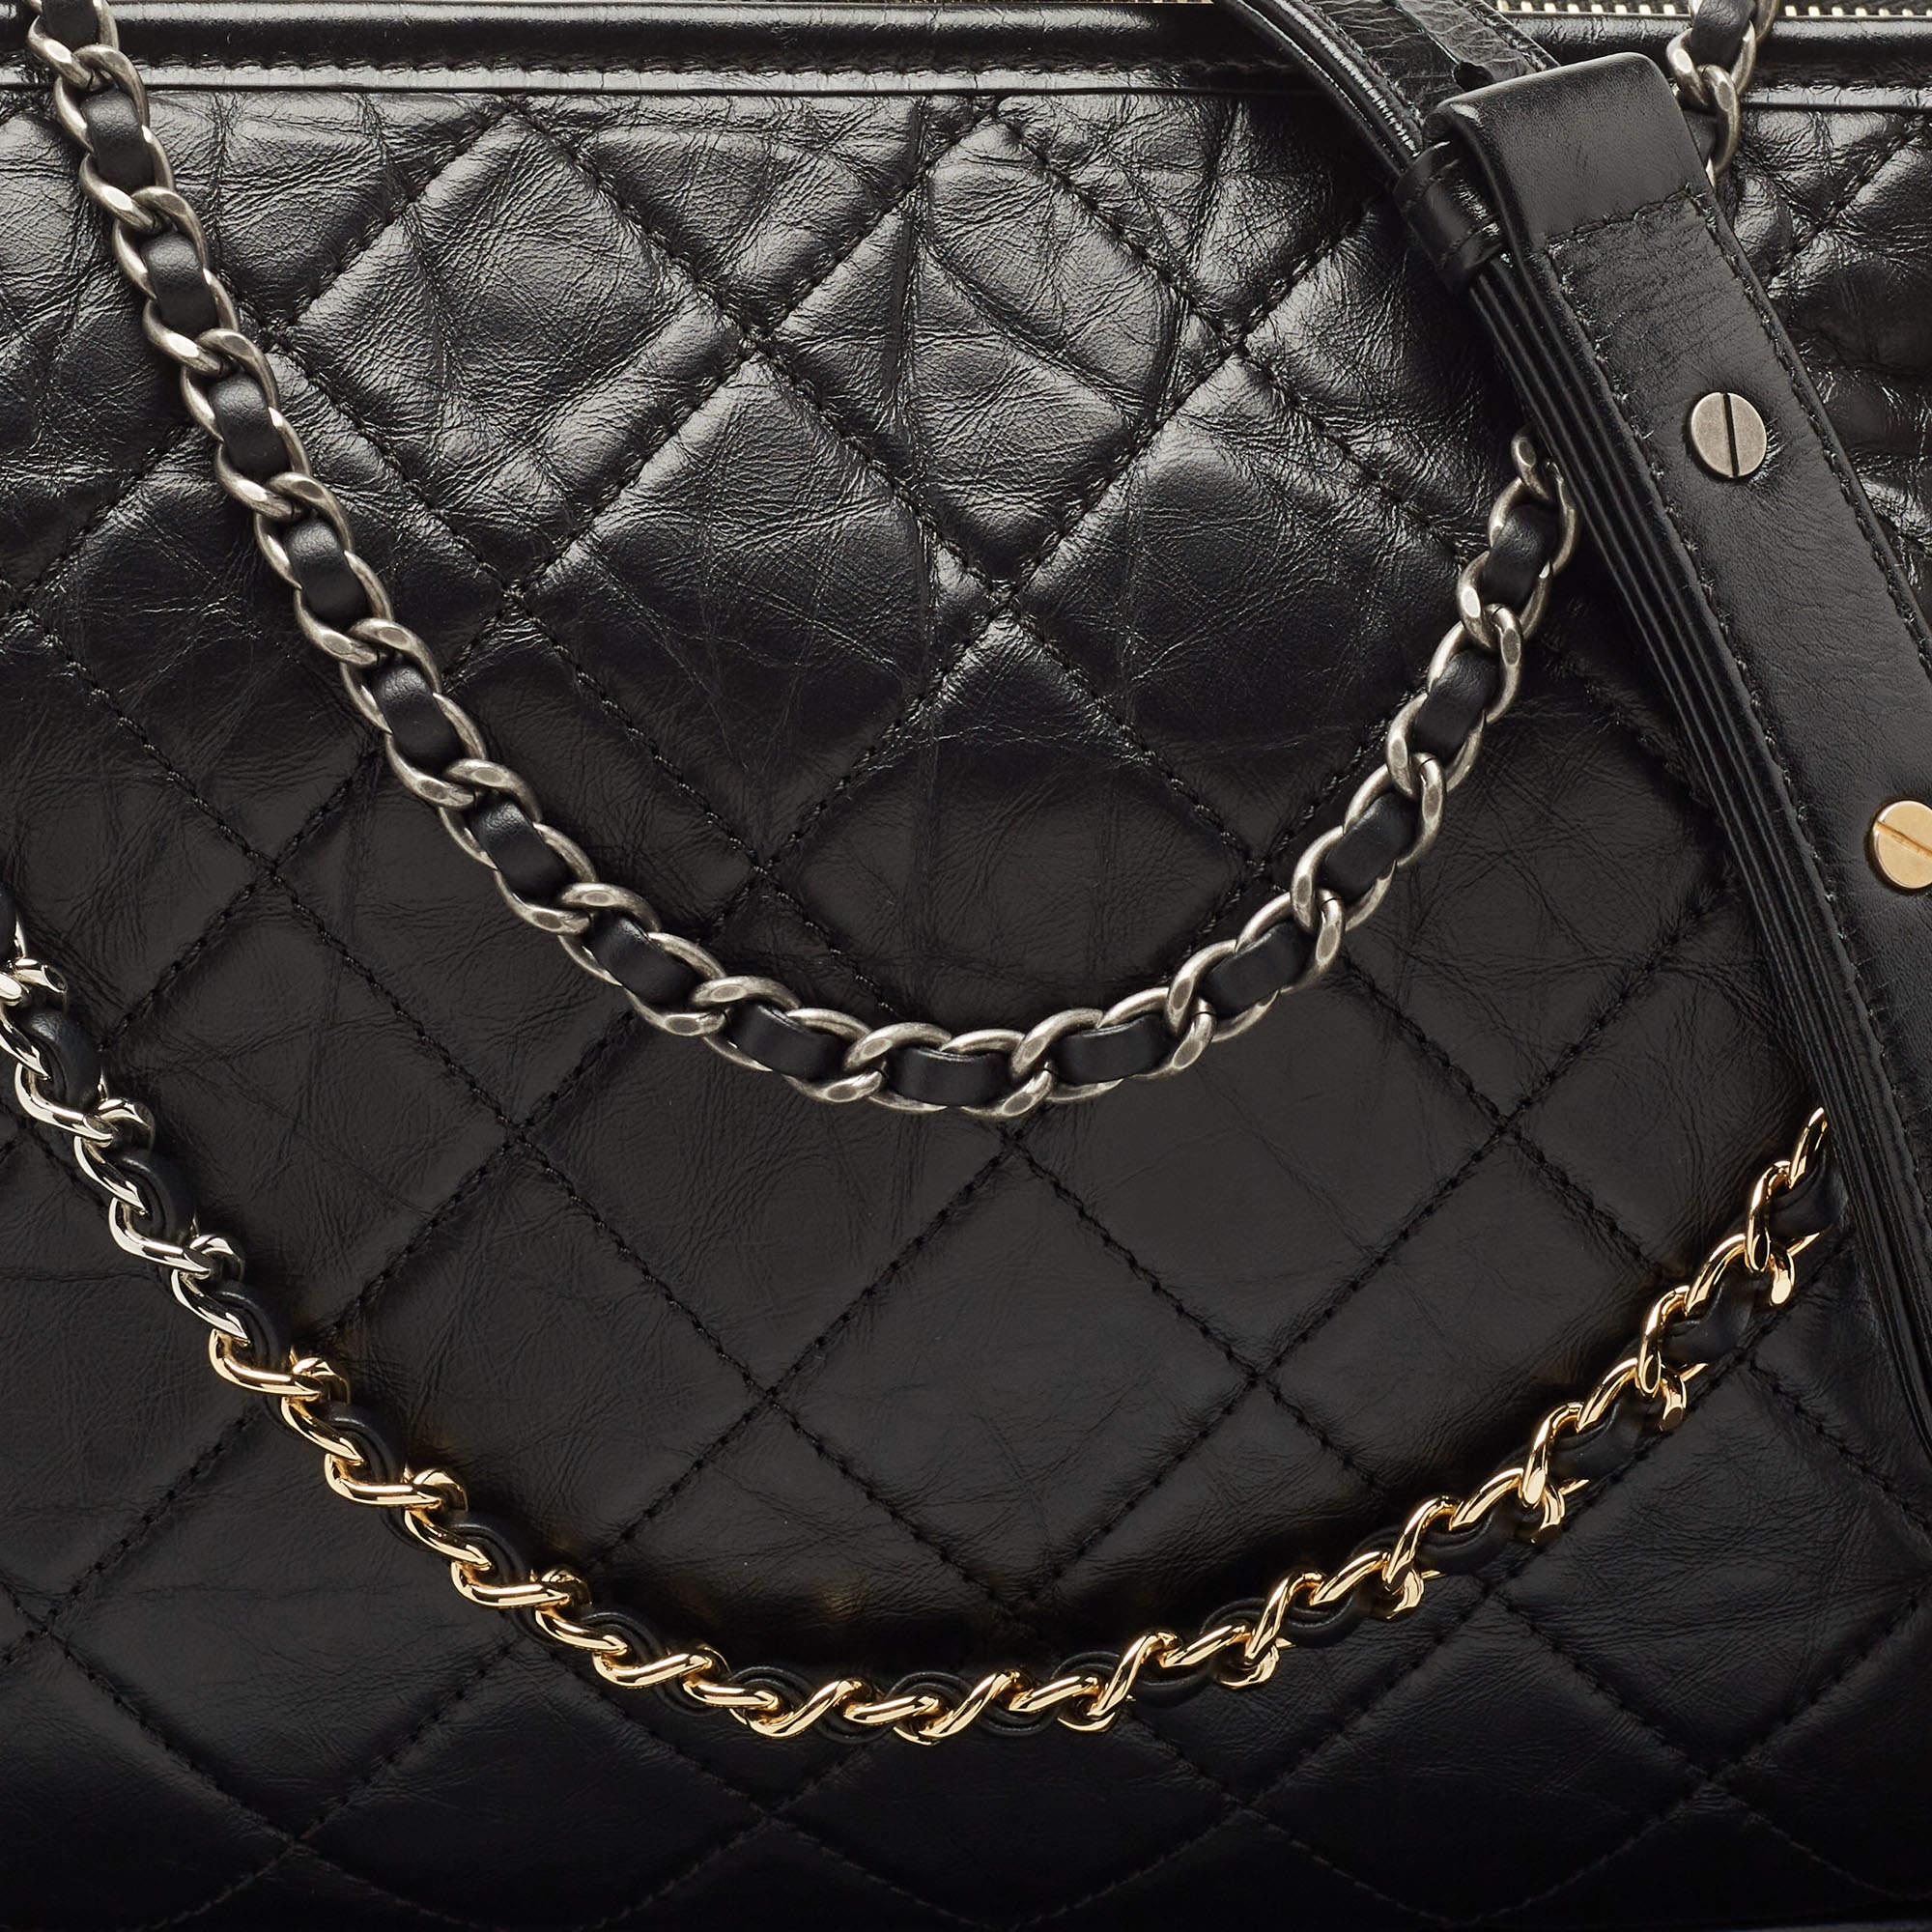 Chanel Black Quilted Aged Leather Large Gabrielle Hobo 10